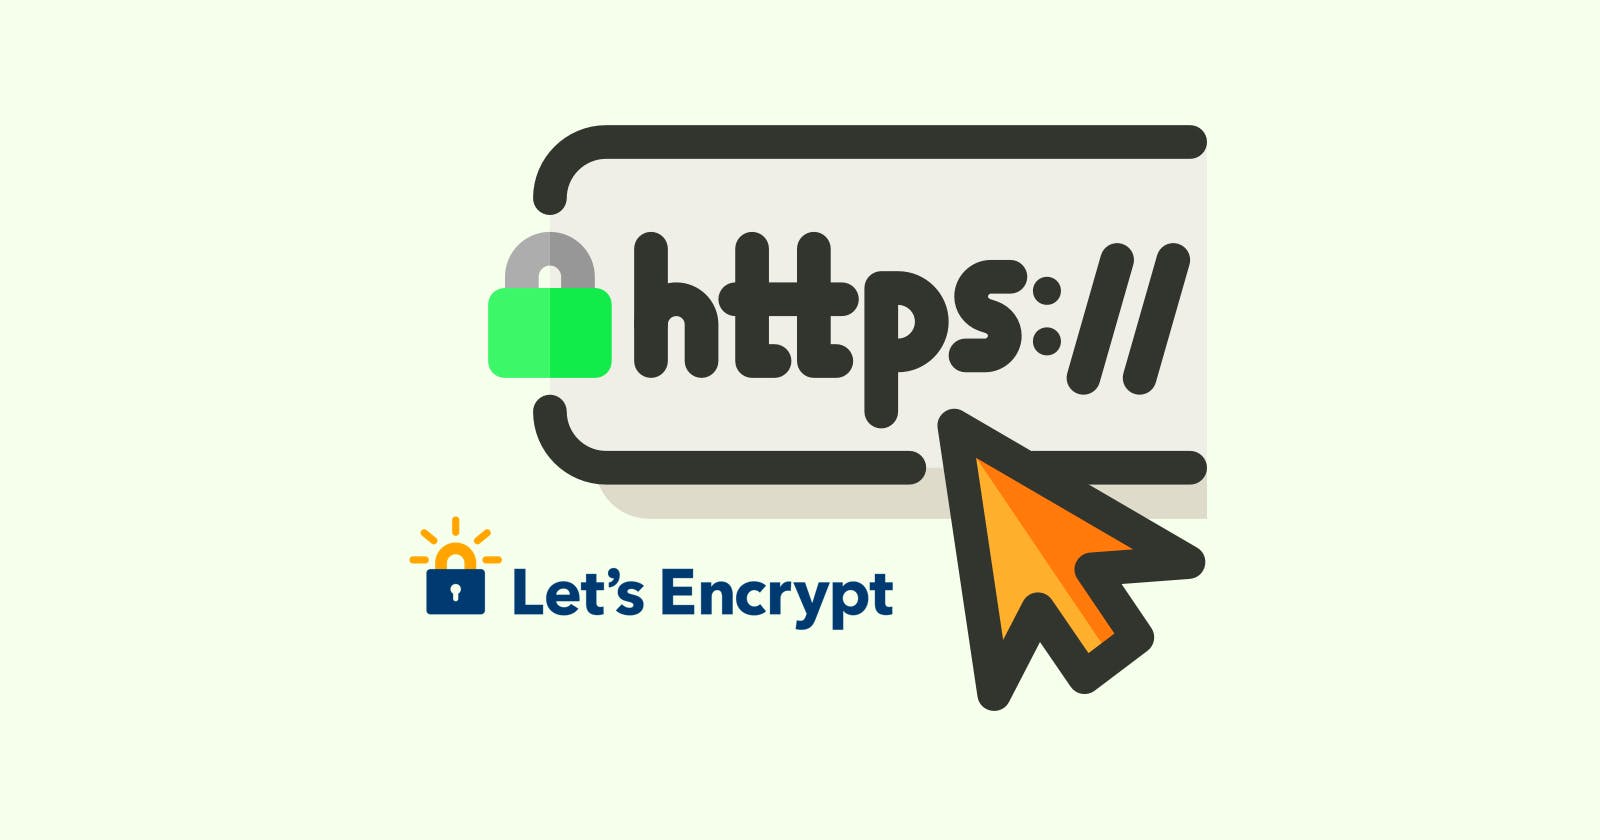 How we generate and renew SSL certs for arbitrary custom domains using LetsEncrypt!